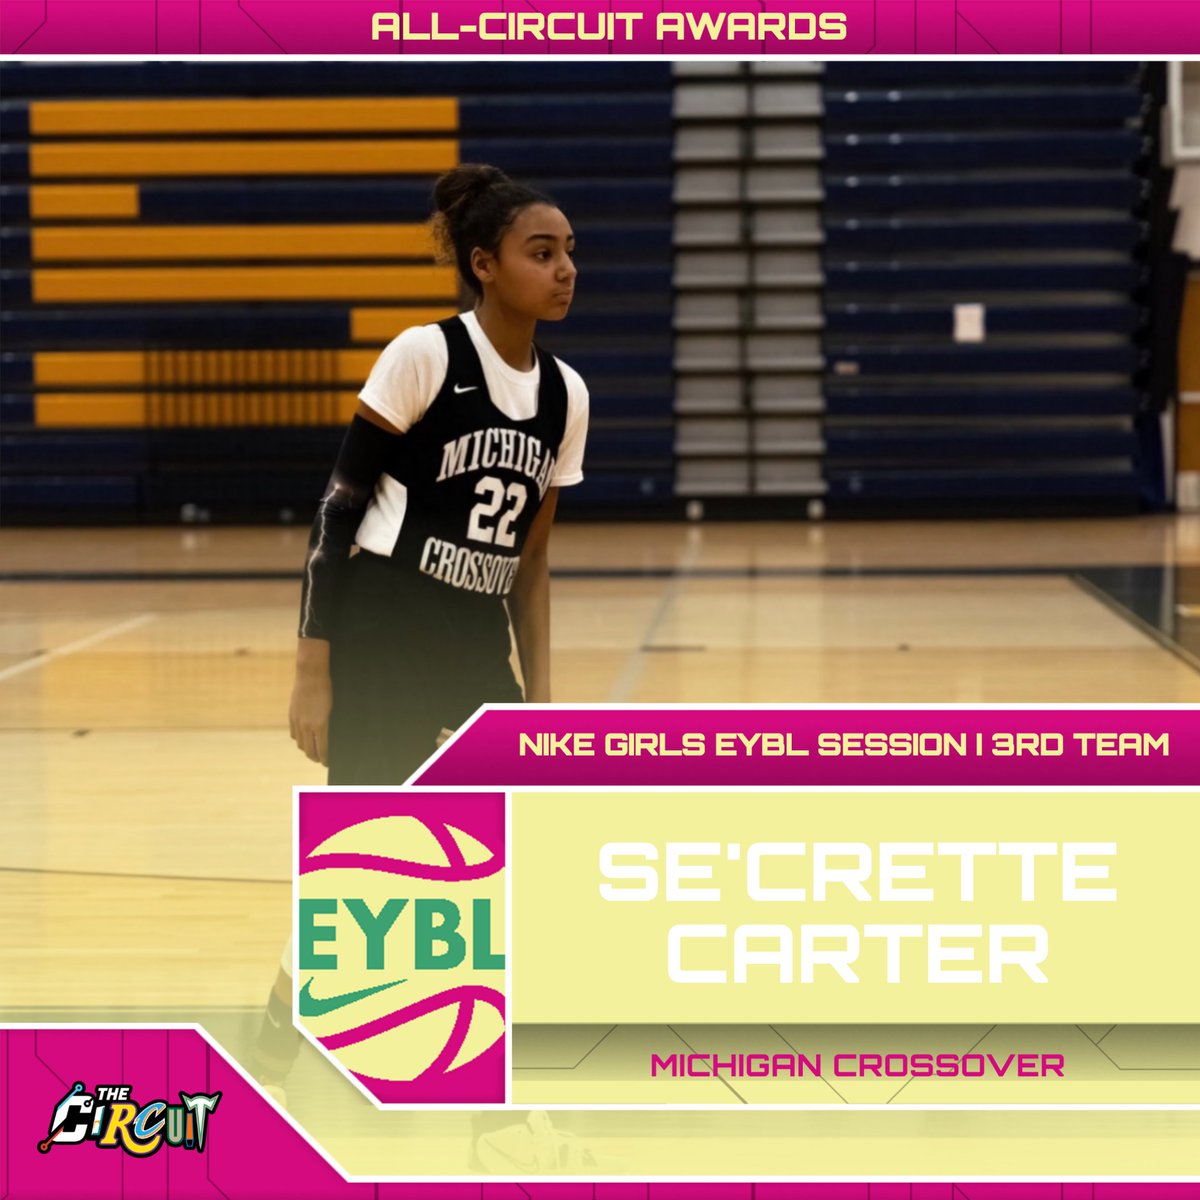 Nike EYBL Hampton | 3rd Team 🥉 Se'Crette Carter | Michigan Crossover Averages ➡️ 15.2 PPG, 3.0 RPG All-Circuit Awards ⤵️ thecircuithoops.com/news_article/s…